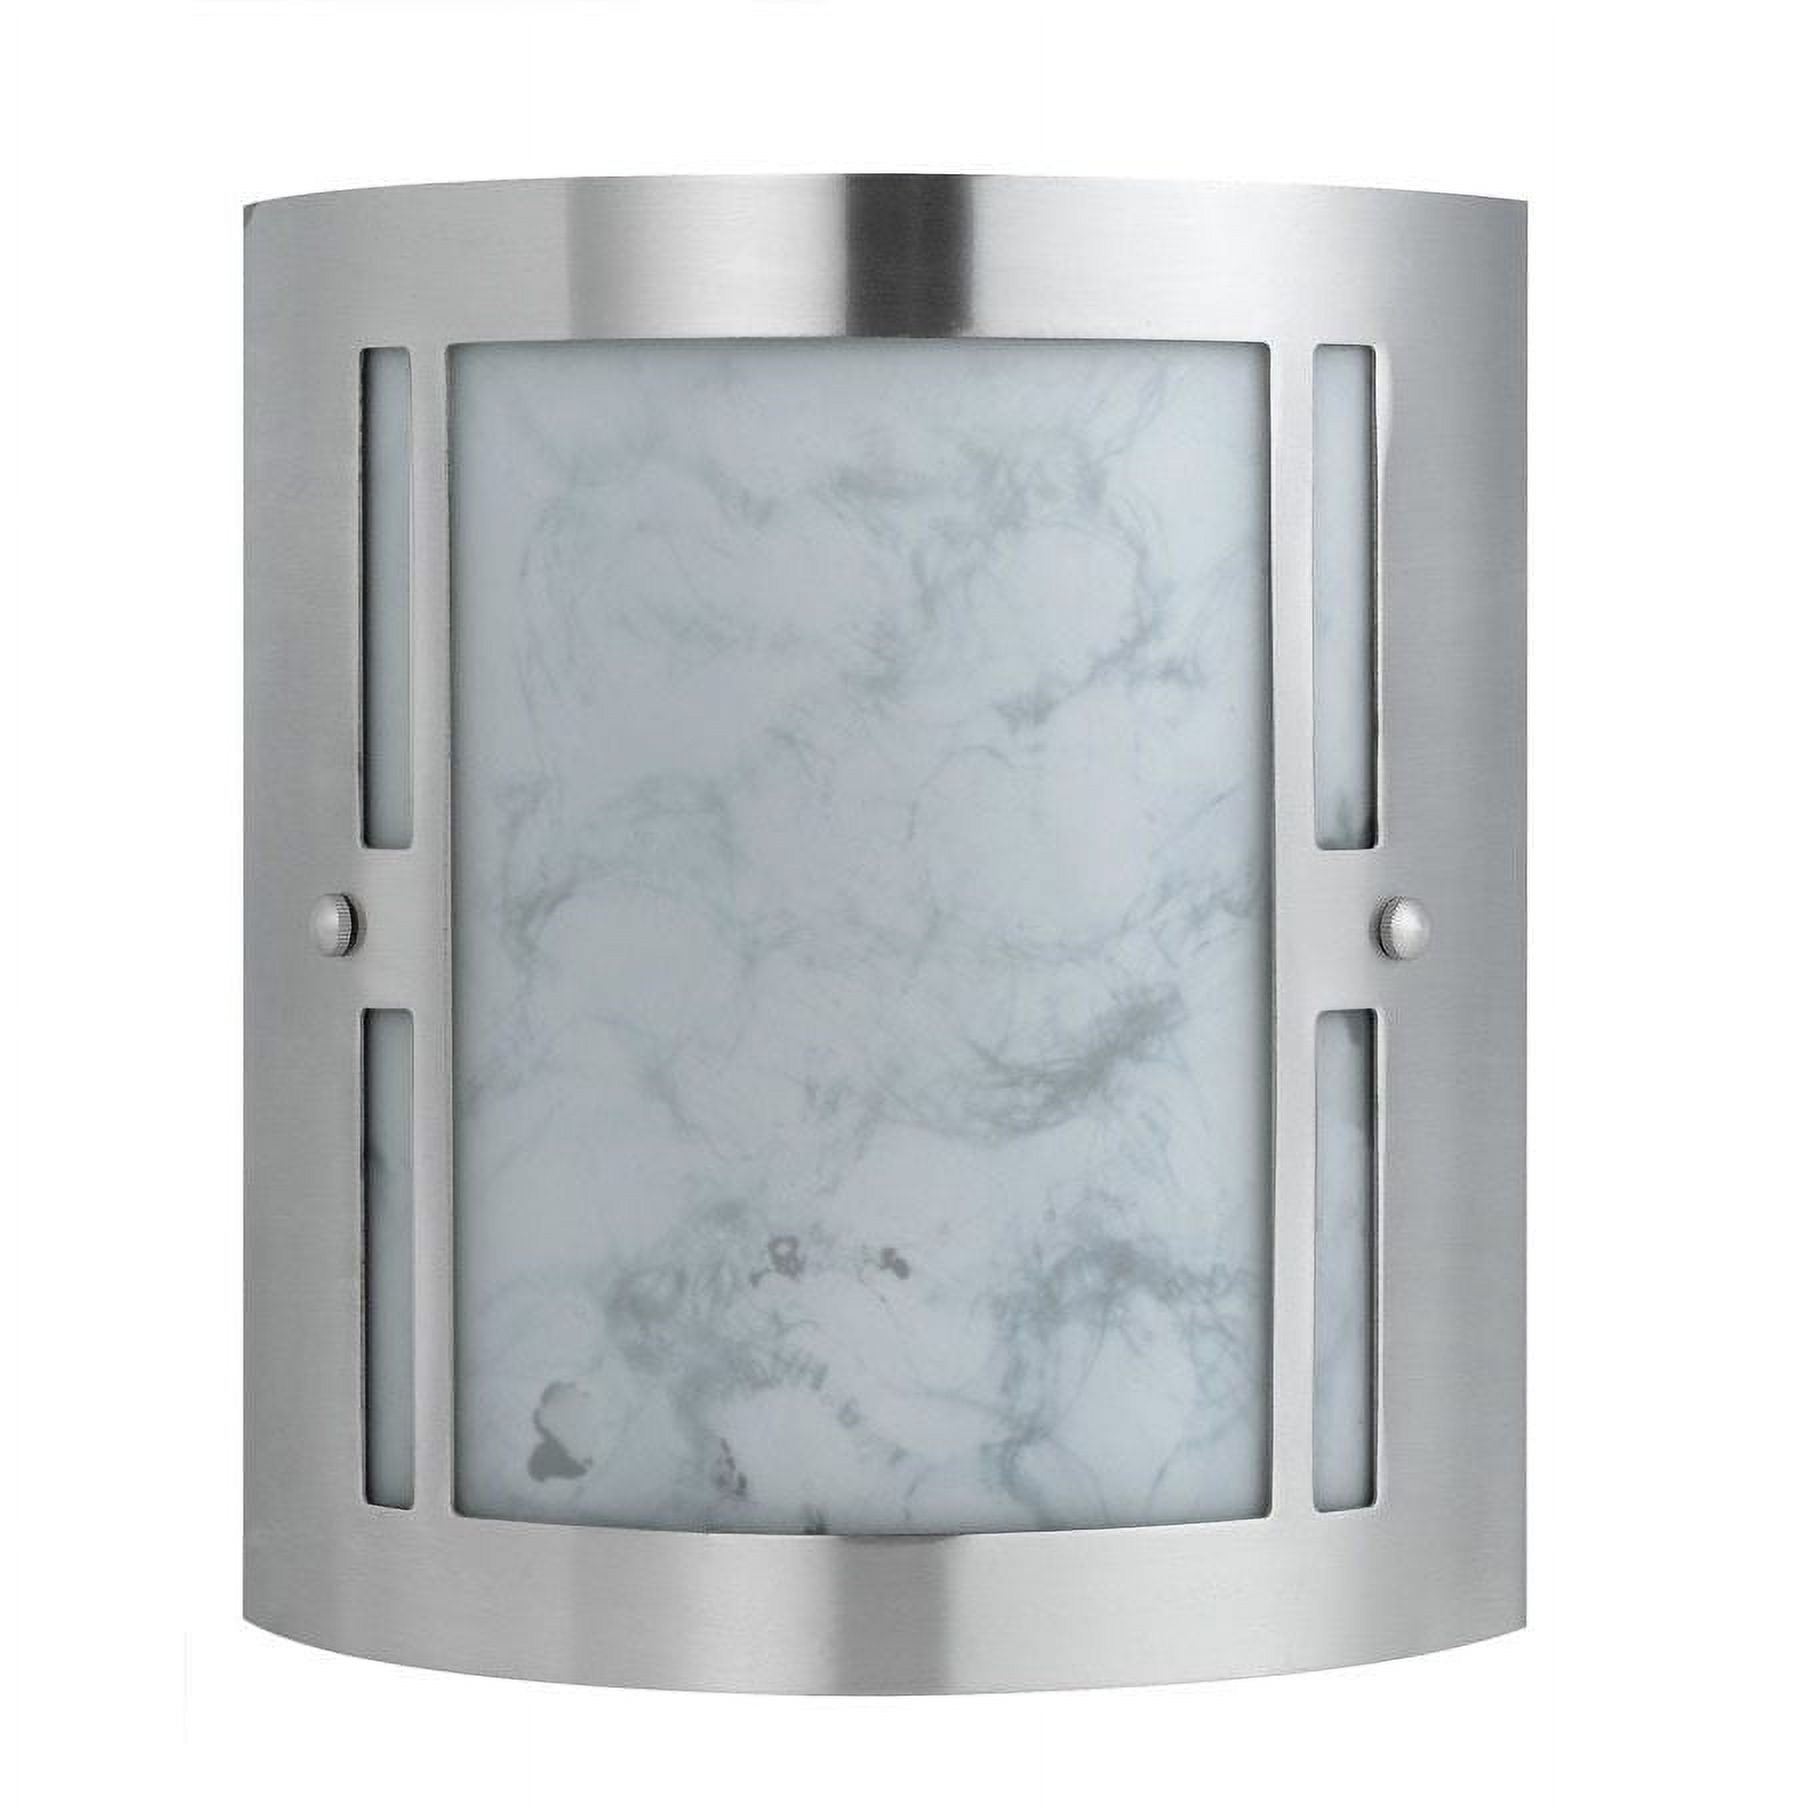 11" Height Vanity Light in Brushed Steel-Color:Brushed Steel,Finish:Brushed Steel,Style:Hotel,Wattage:26WX2 - image 2 of 2